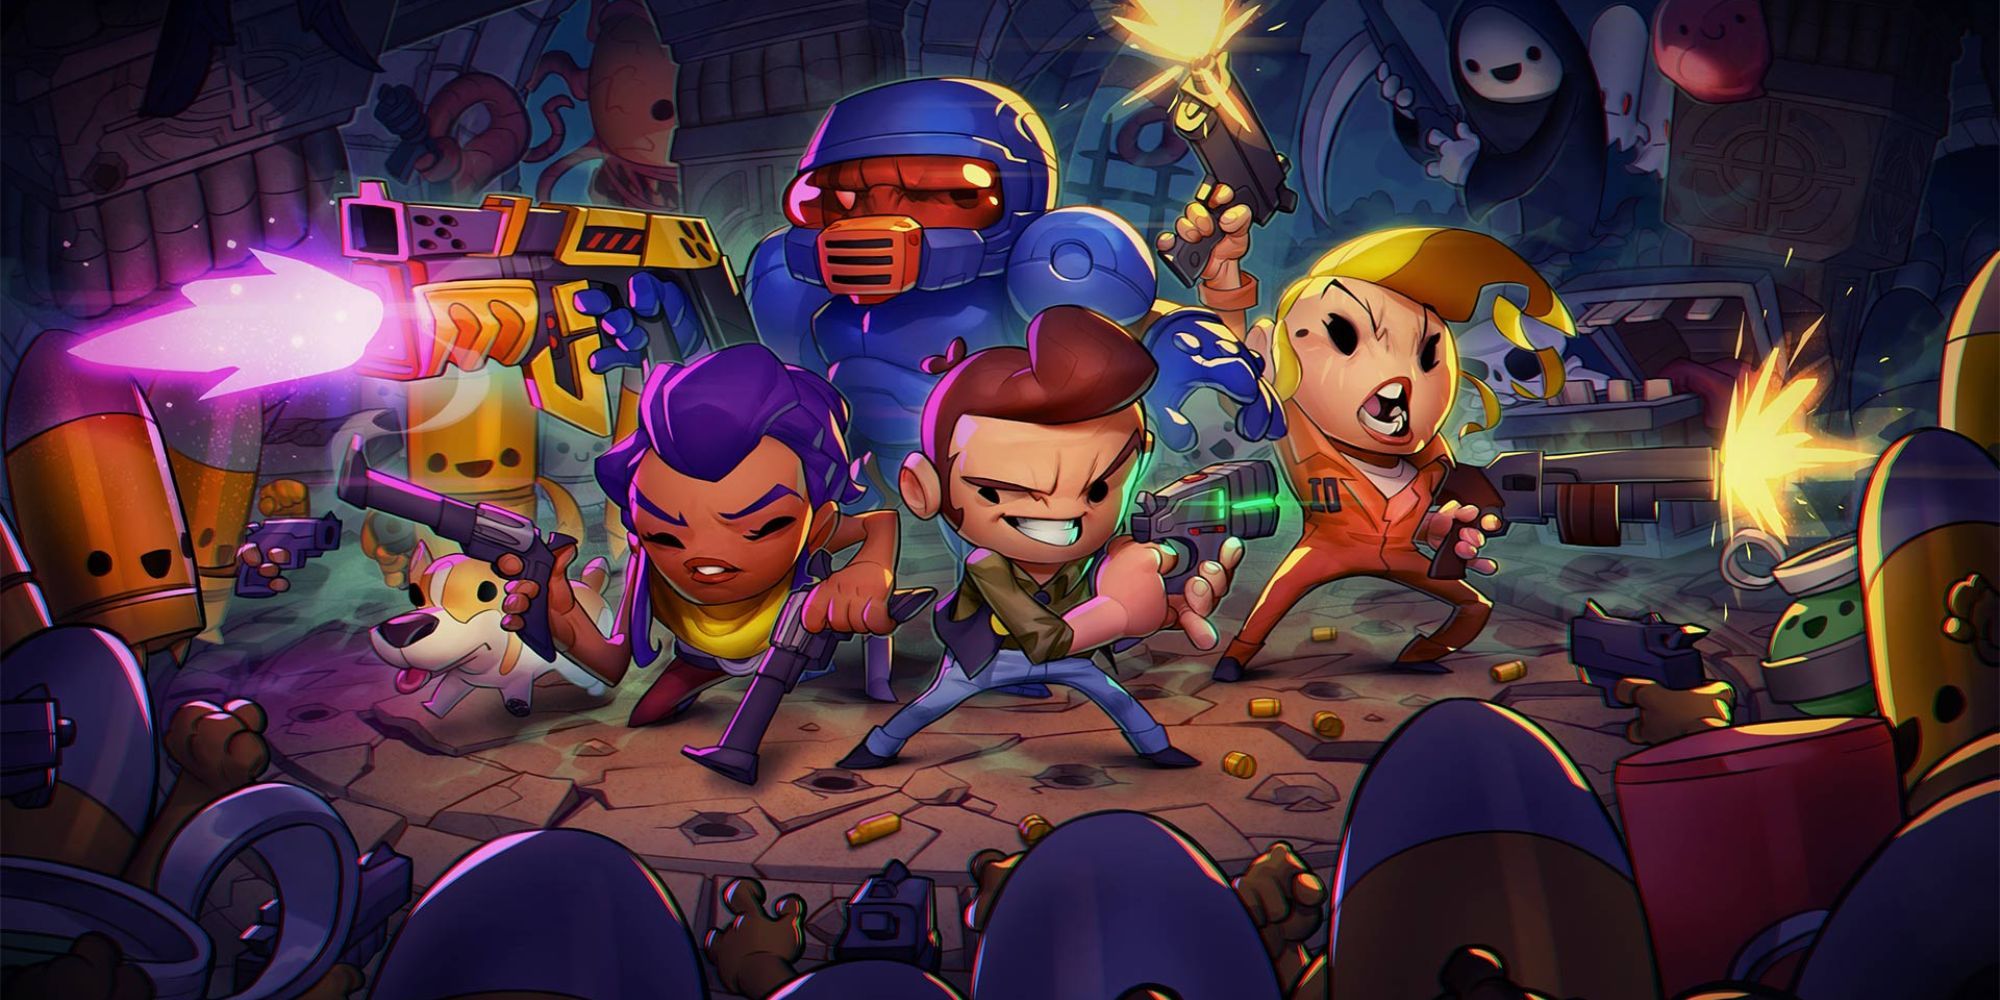 Enter The Gungeon characters standing together surrounded